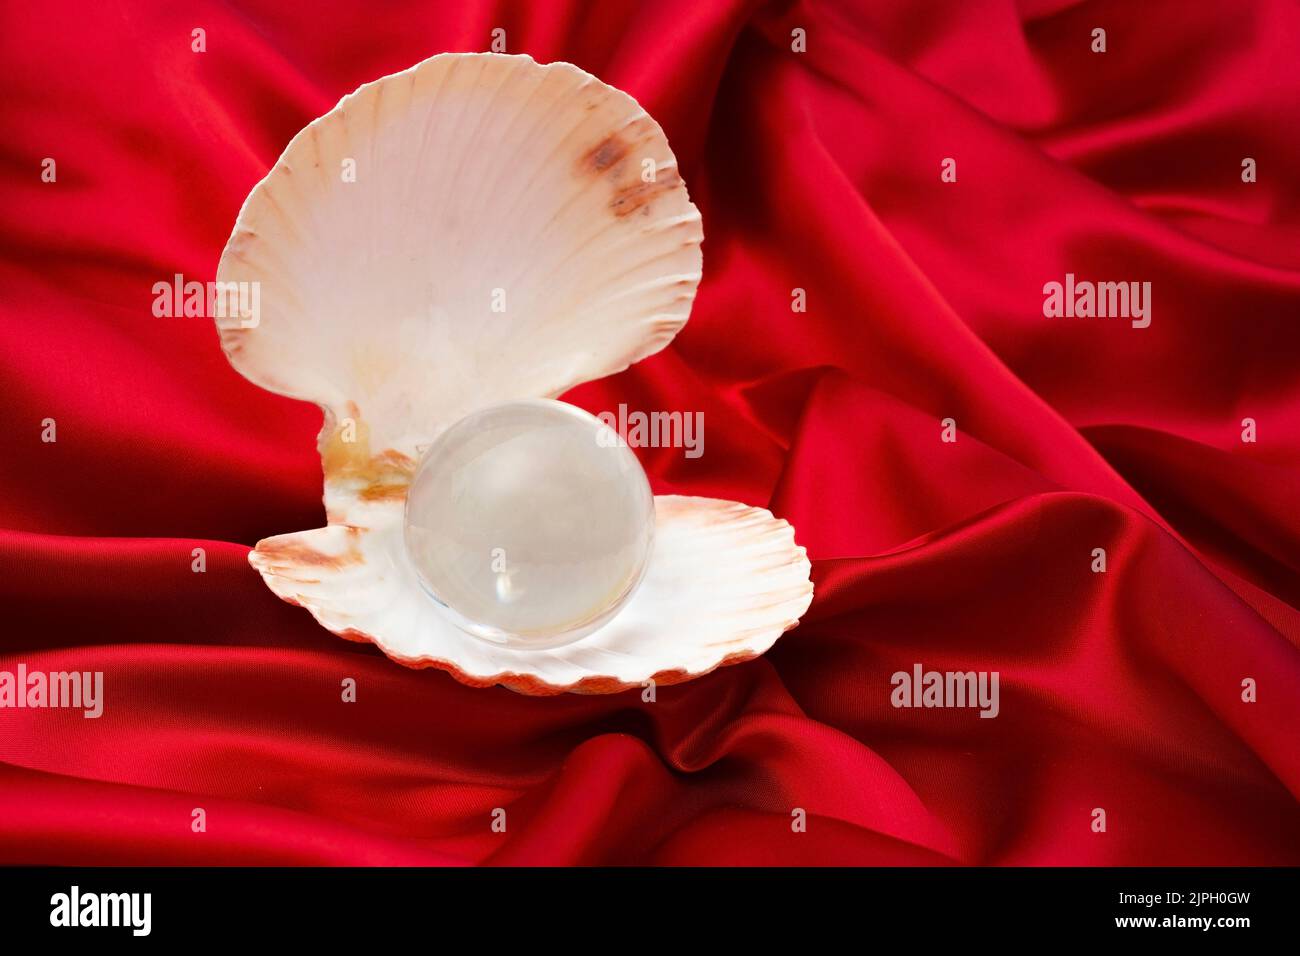 Opened sea shell with a big crystal lens ball, on red satin background, abstract valentines template. Stock Photo